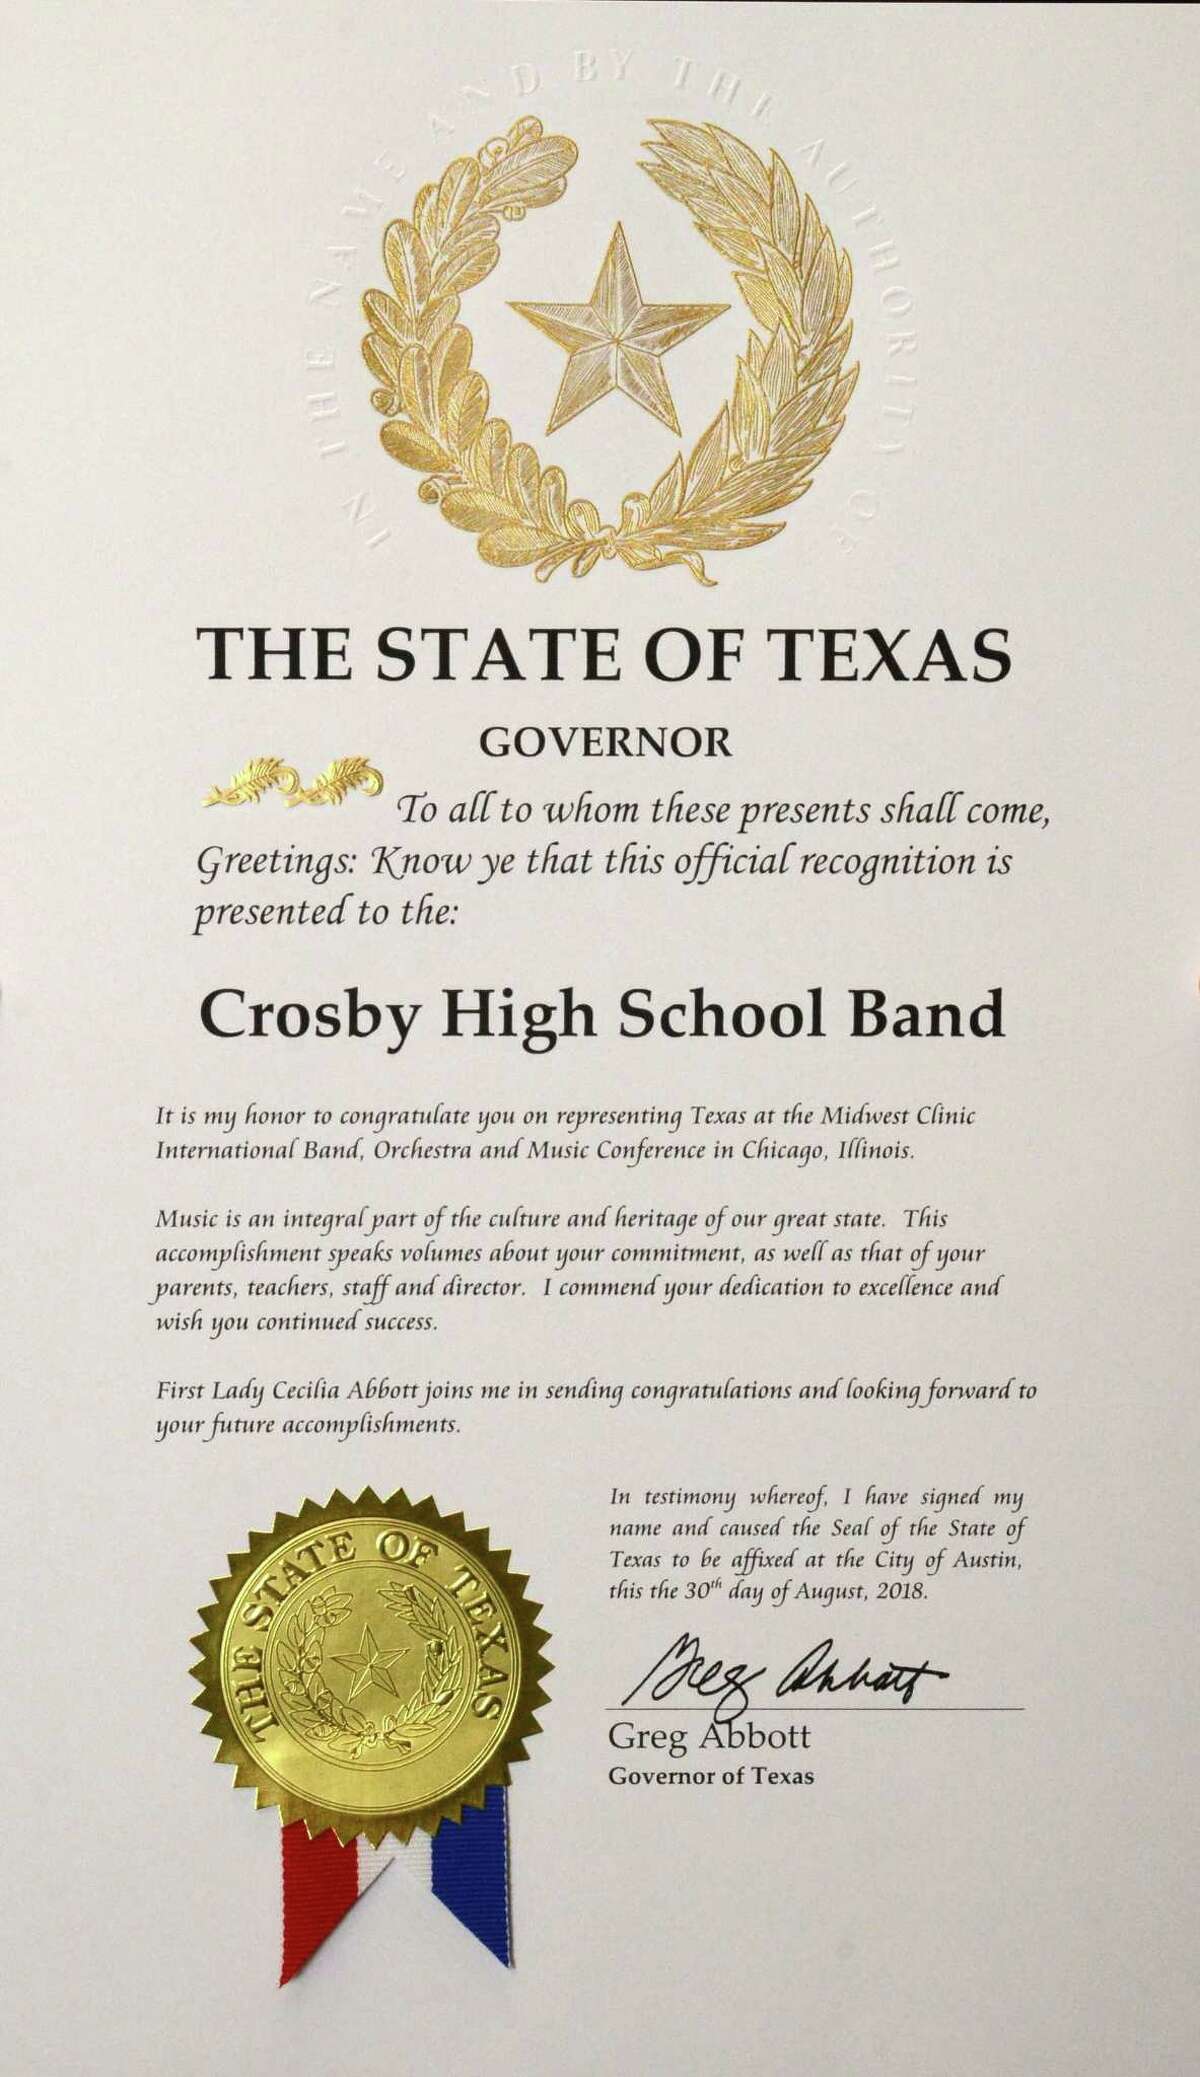 Governor Greg Abbott's Office sent a letter to the Crosby High School Band congratulating and recognizing them for being accepting into the 72nd Midwest Clinic in Chicago.